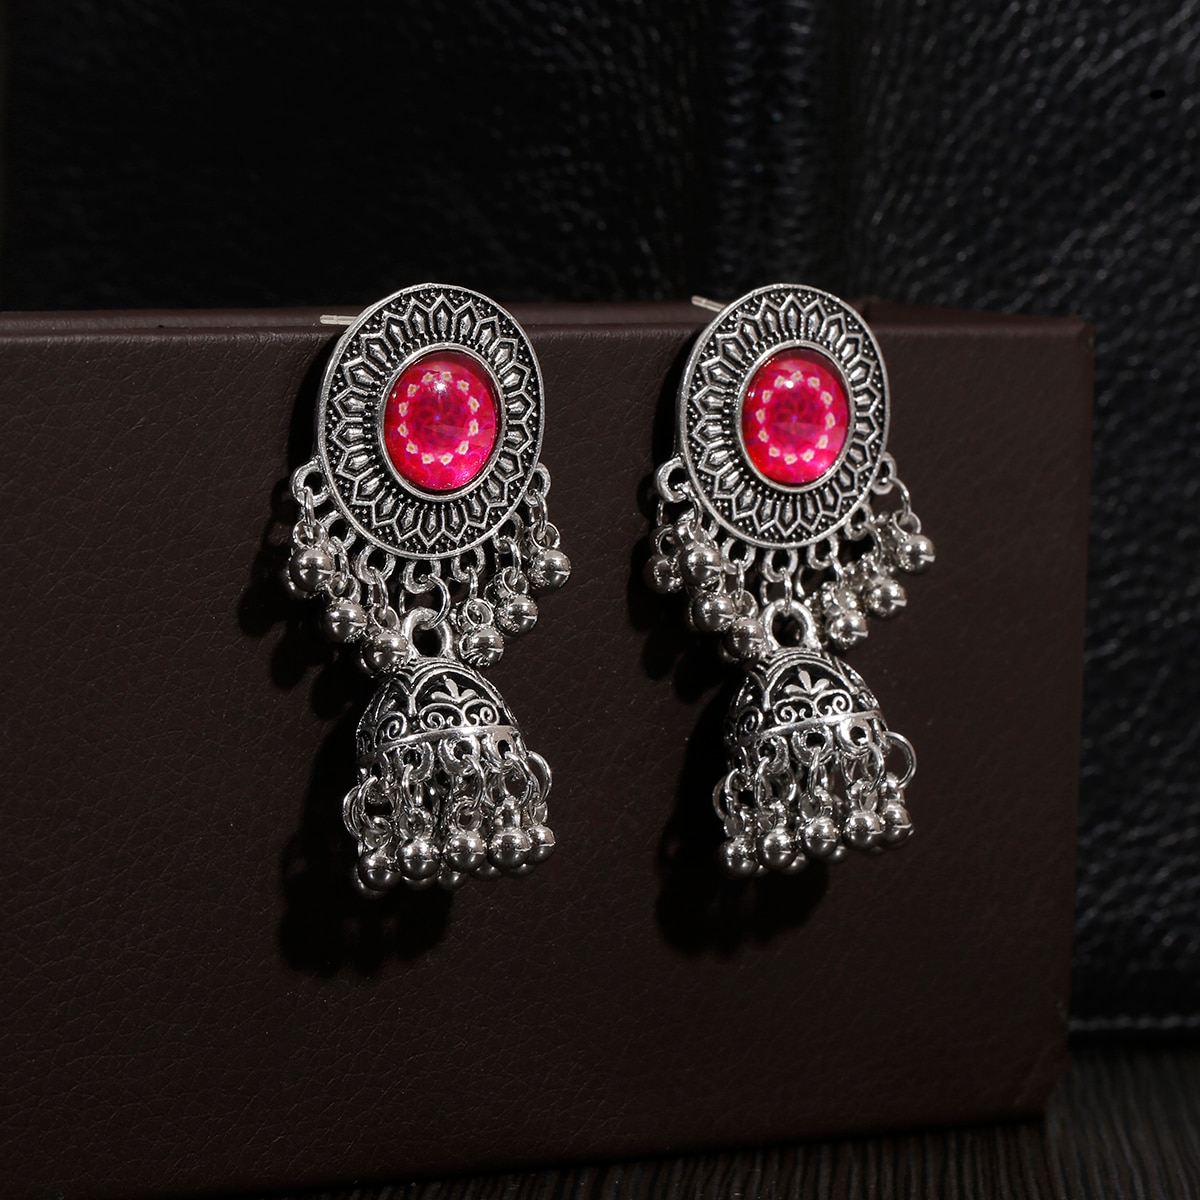 Classic-Vintage-Silver-Color-Alloy-Carved-Bollywood-Oxidized-Earrings-For-Women-Ethnic-Rose-Red-Jhum-1005003651700580-3